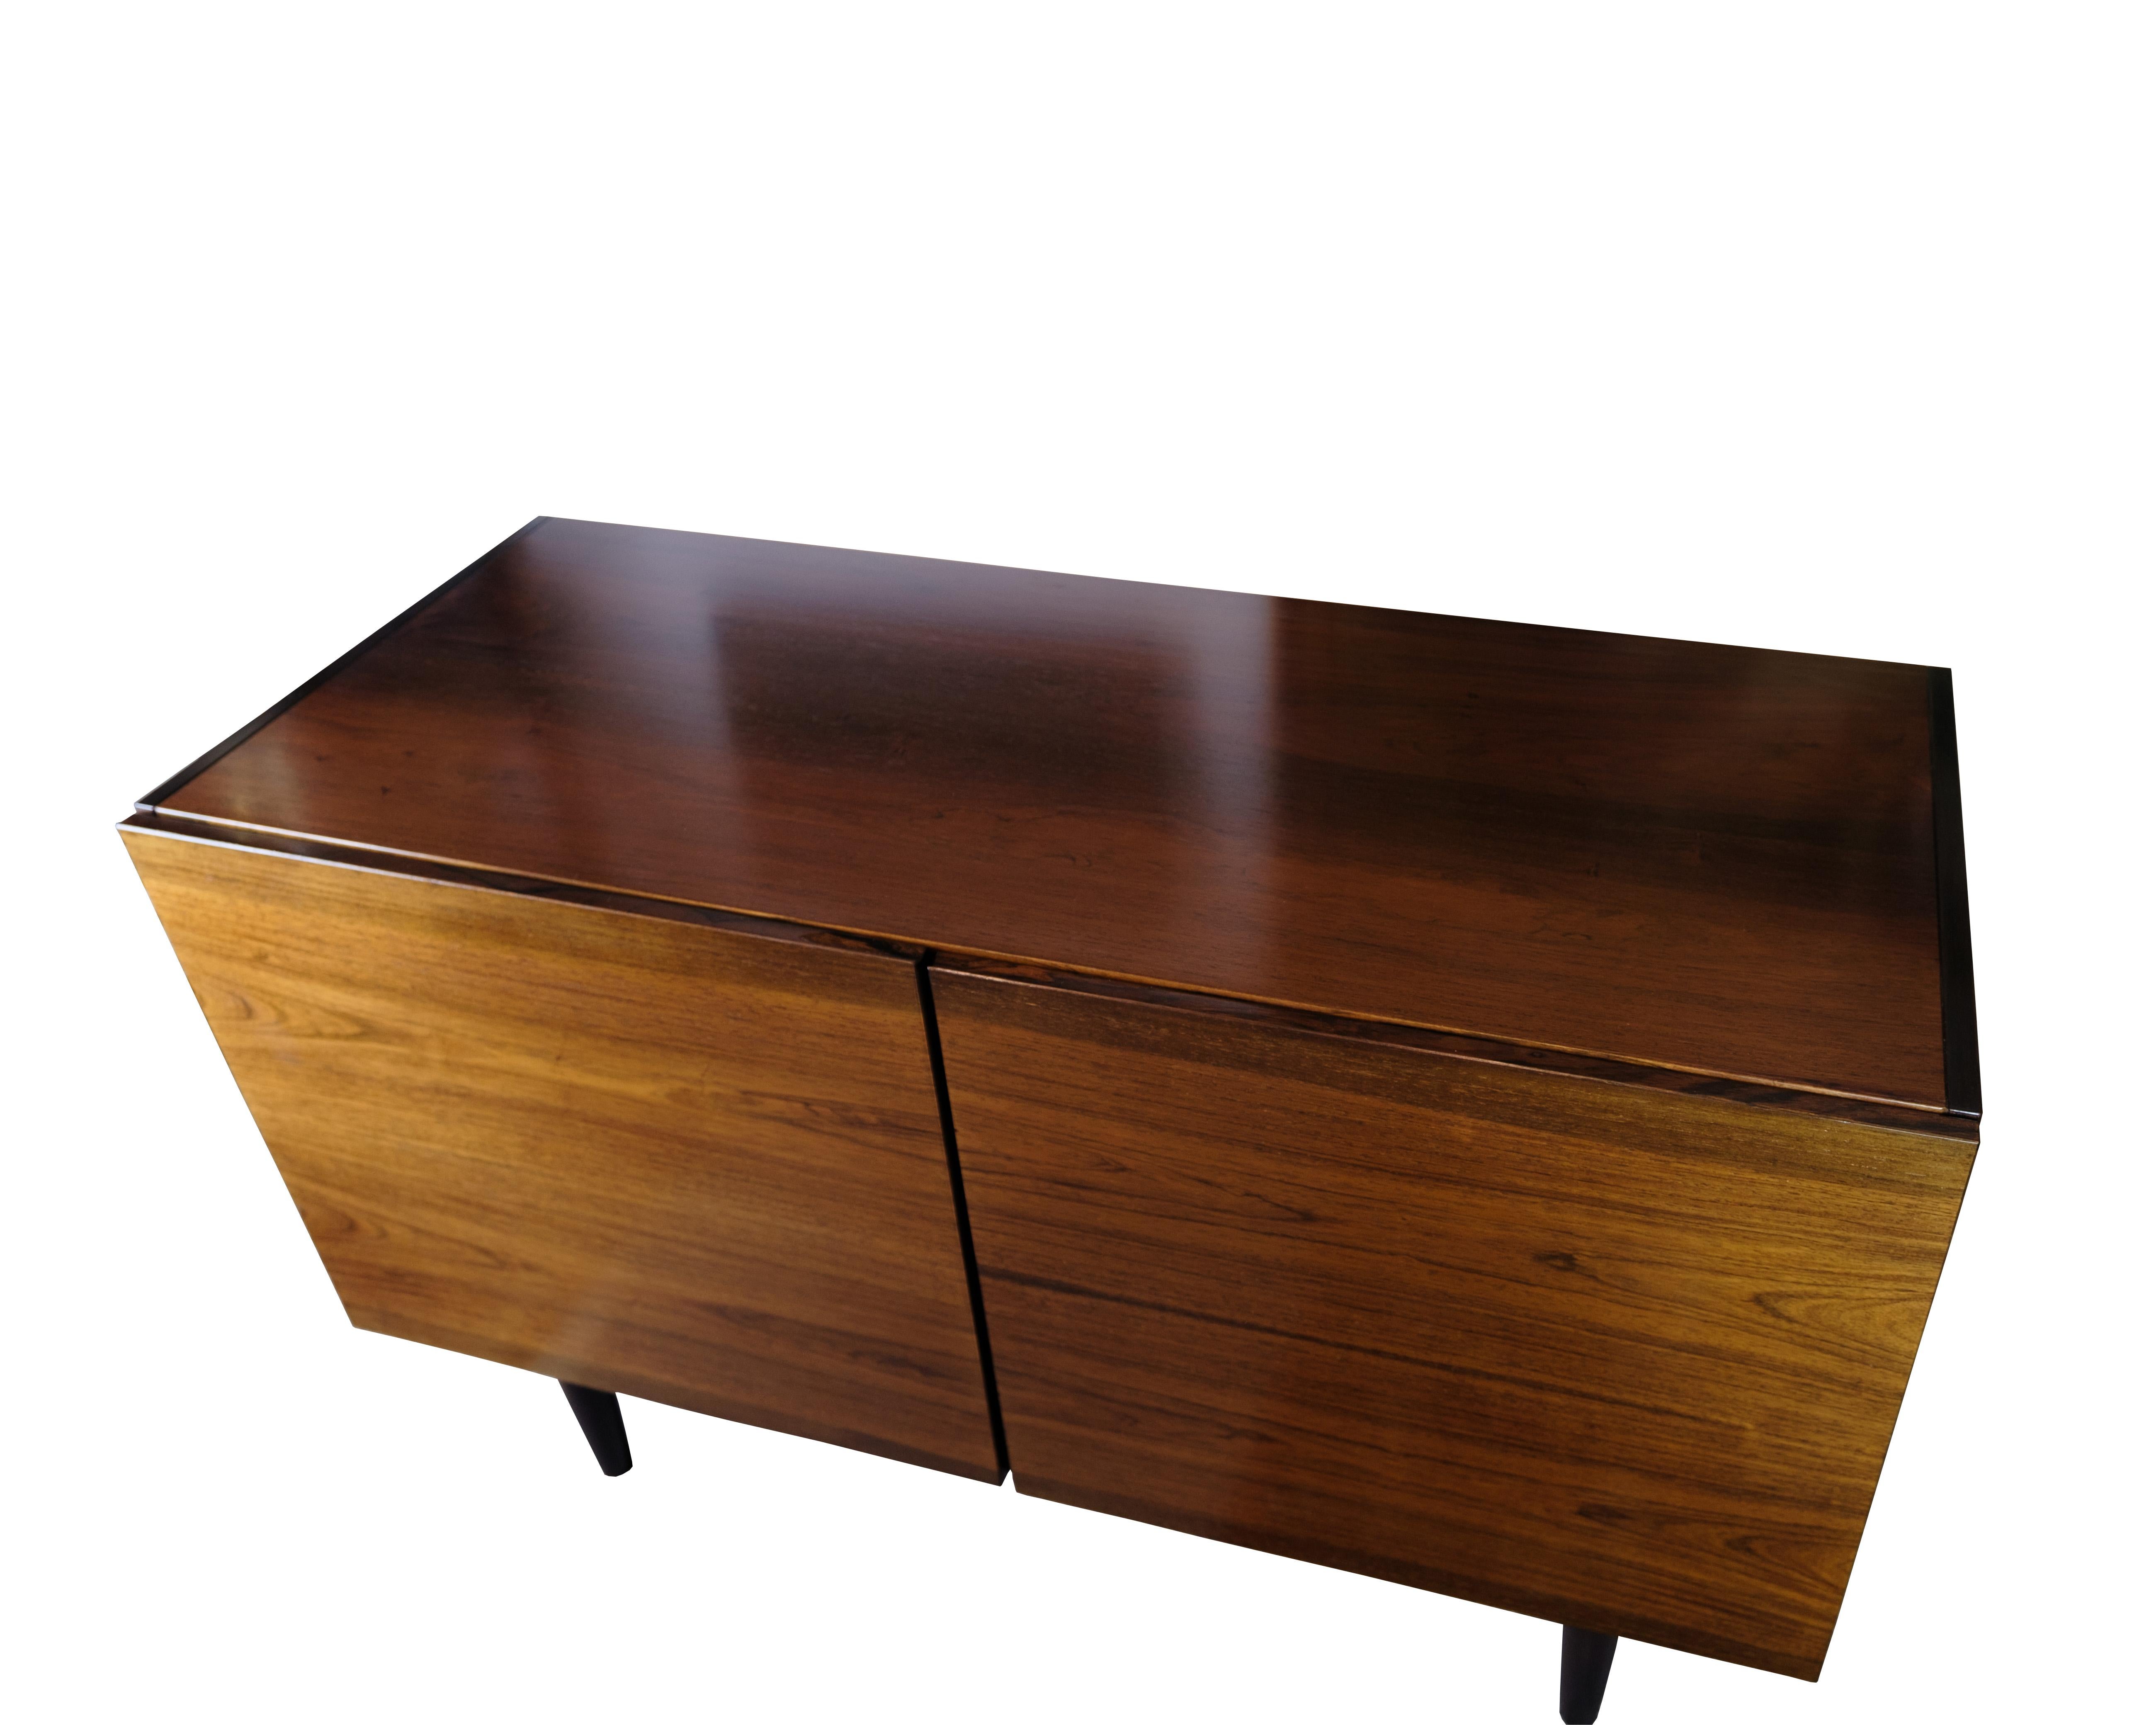 This sideboard in rosewood represents the timeless elegance and functionality that characterizes Danish design from the 1960s. With its two doors and shelf options inside, the sideboard offers both style and practical storage space.

The warm tone